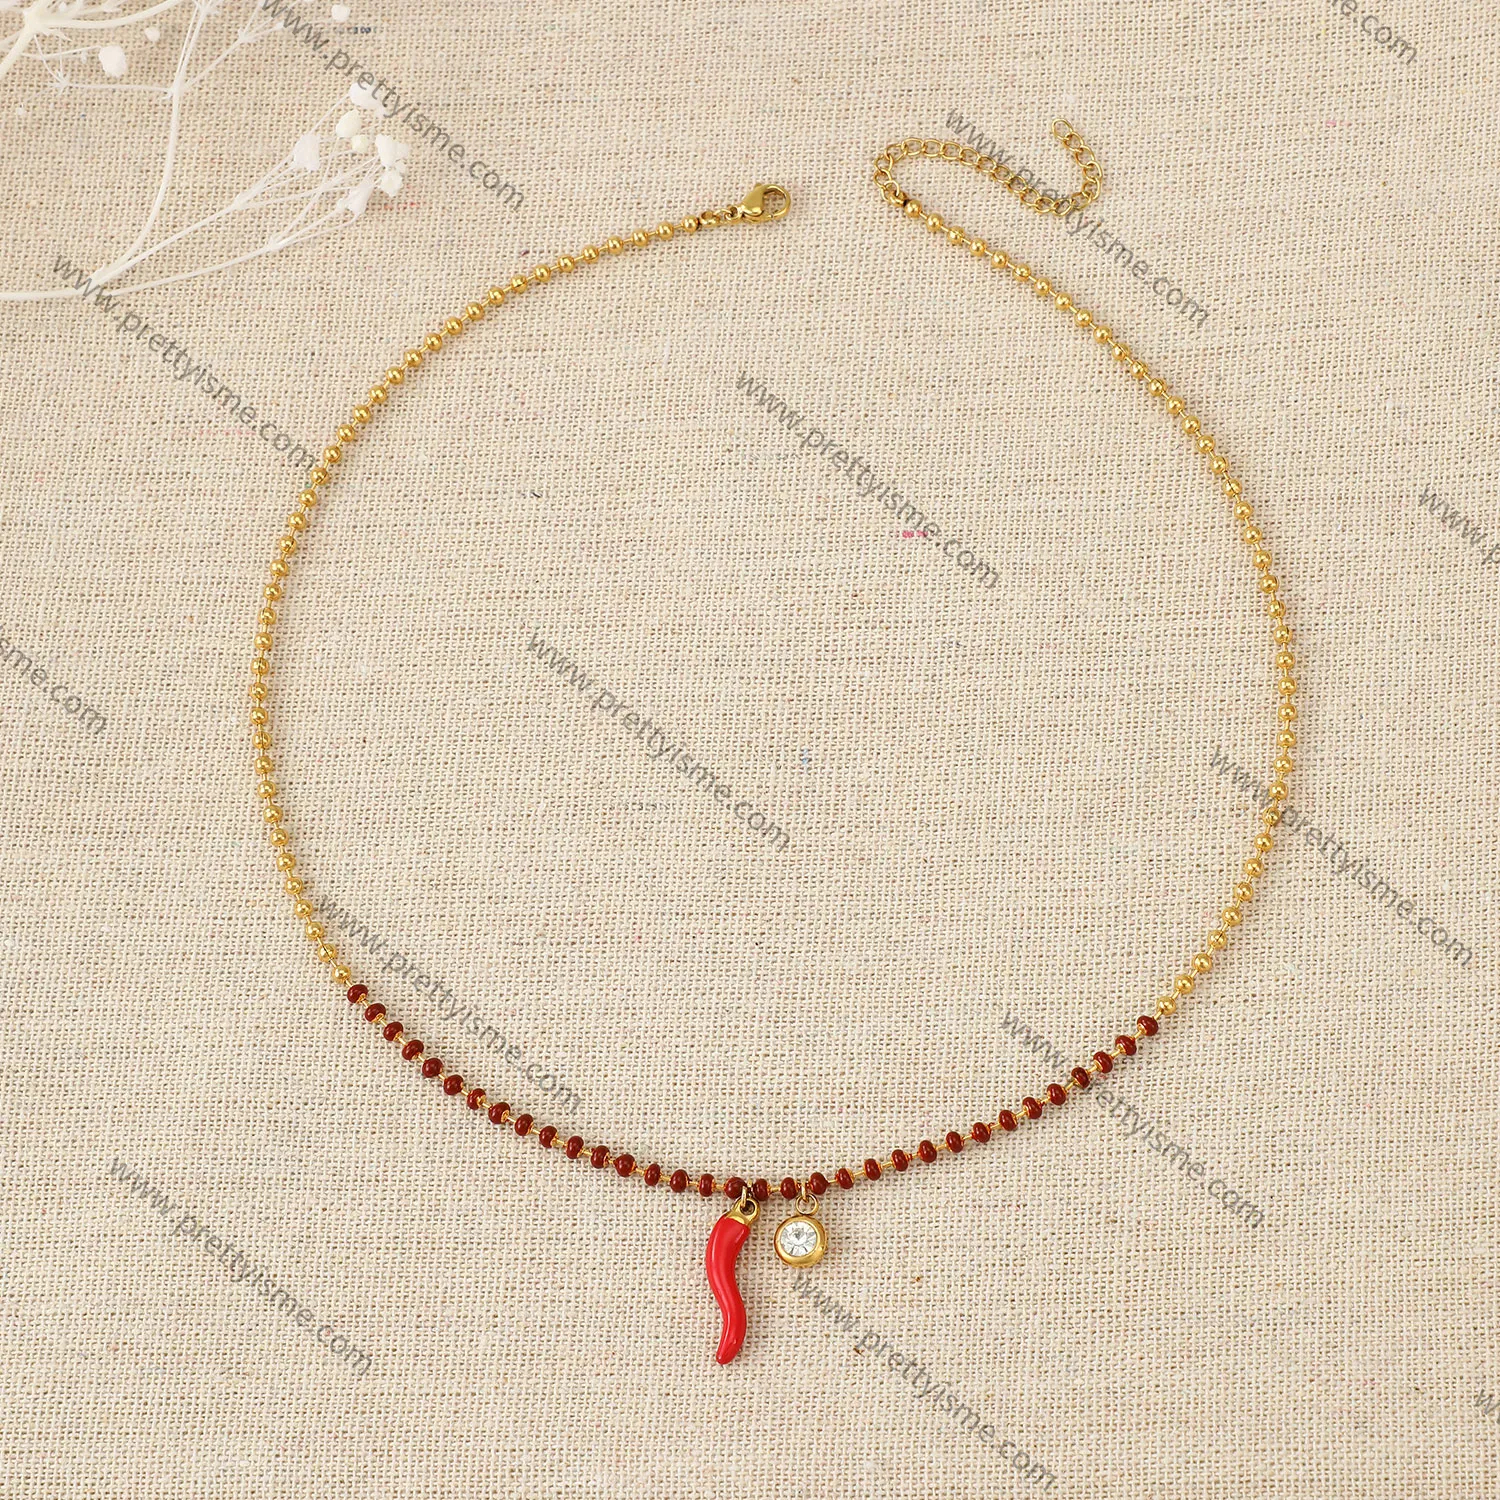 Small Pepper Pendant Stainless Steel Gold Plated 18K Necklace with Red Round Beads and Diamonds Delicate Necklace.webp